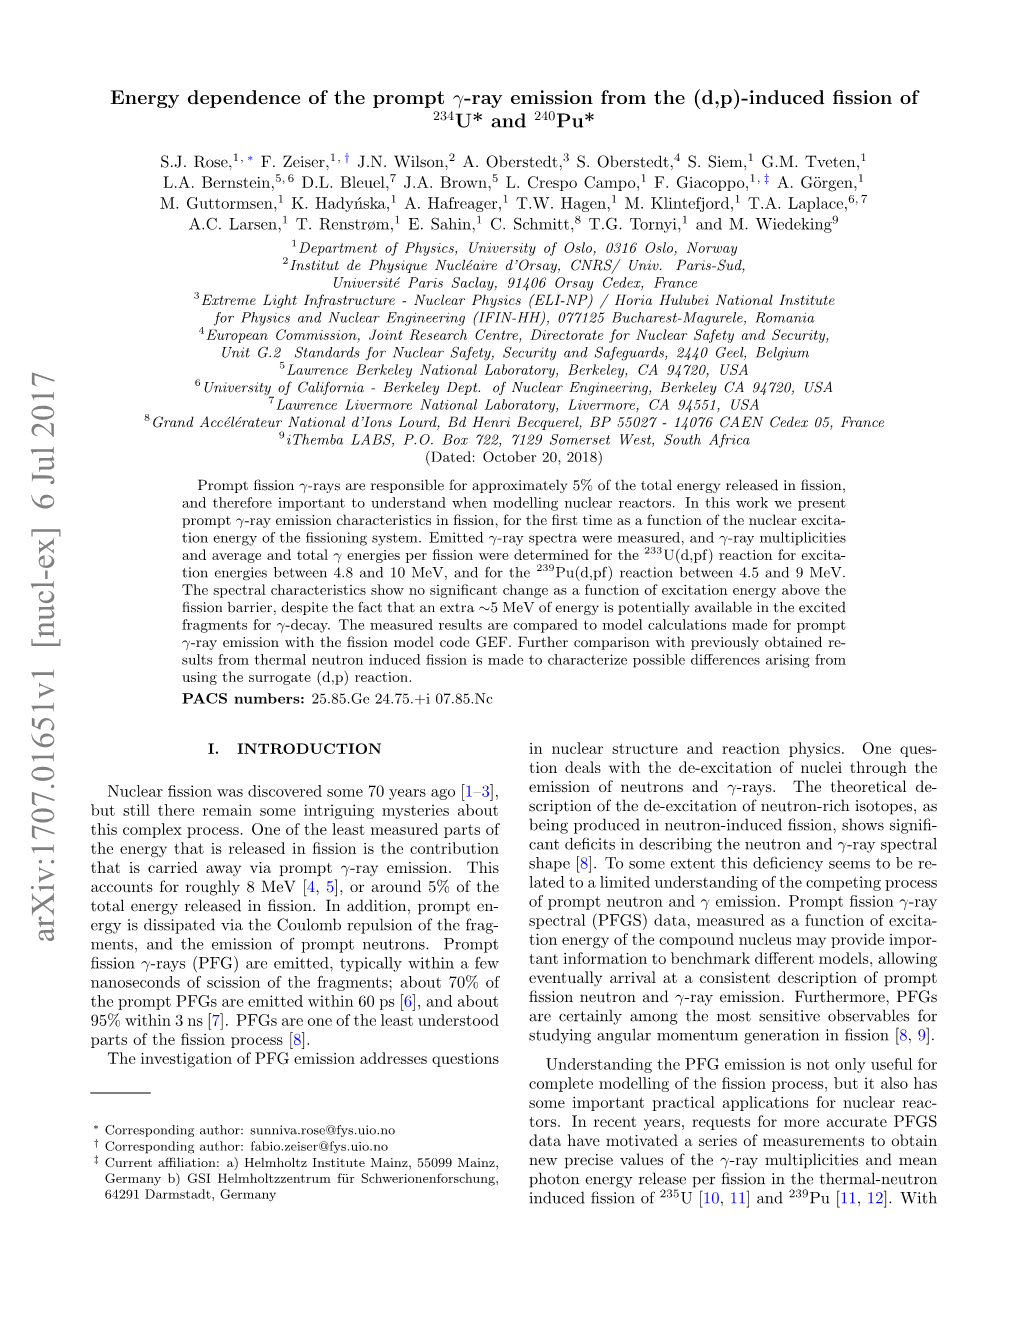 Energy Dependence of the Prompt ${\Gamma} $-Ray Emission from the $(D, P) $-Induced Fission of $^{234}\Mathrm {U}^{*} $ and $^{240}\Mathrm {Pu}^{*} $